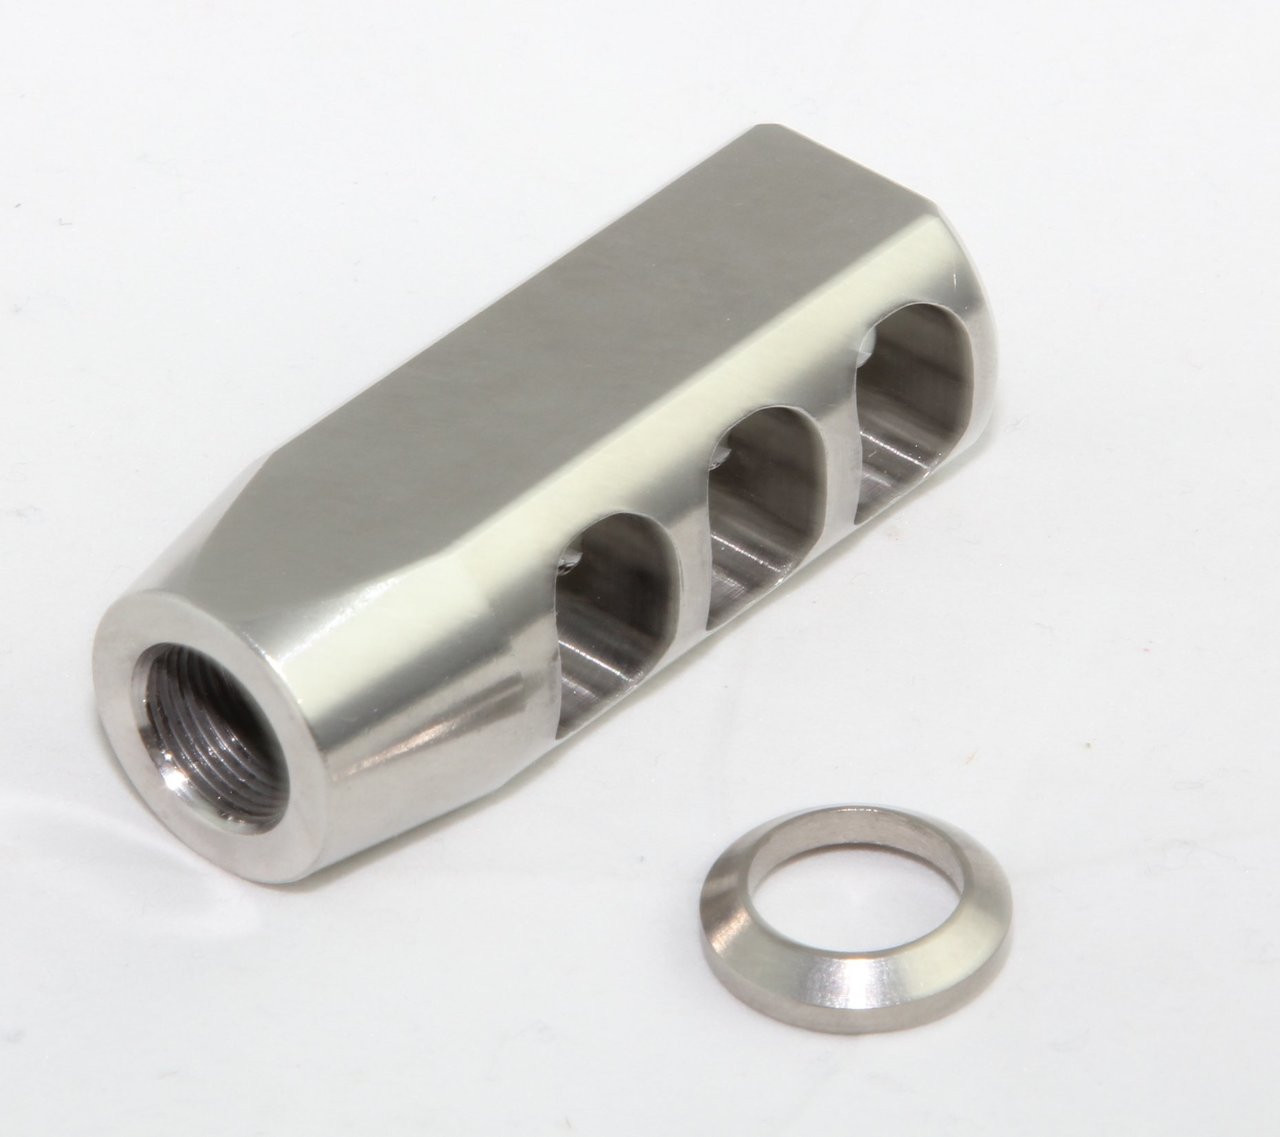 Muzzle Brake Compact STAINLESS STEEL 5/8-24 Pitch W/ free crush washer ...